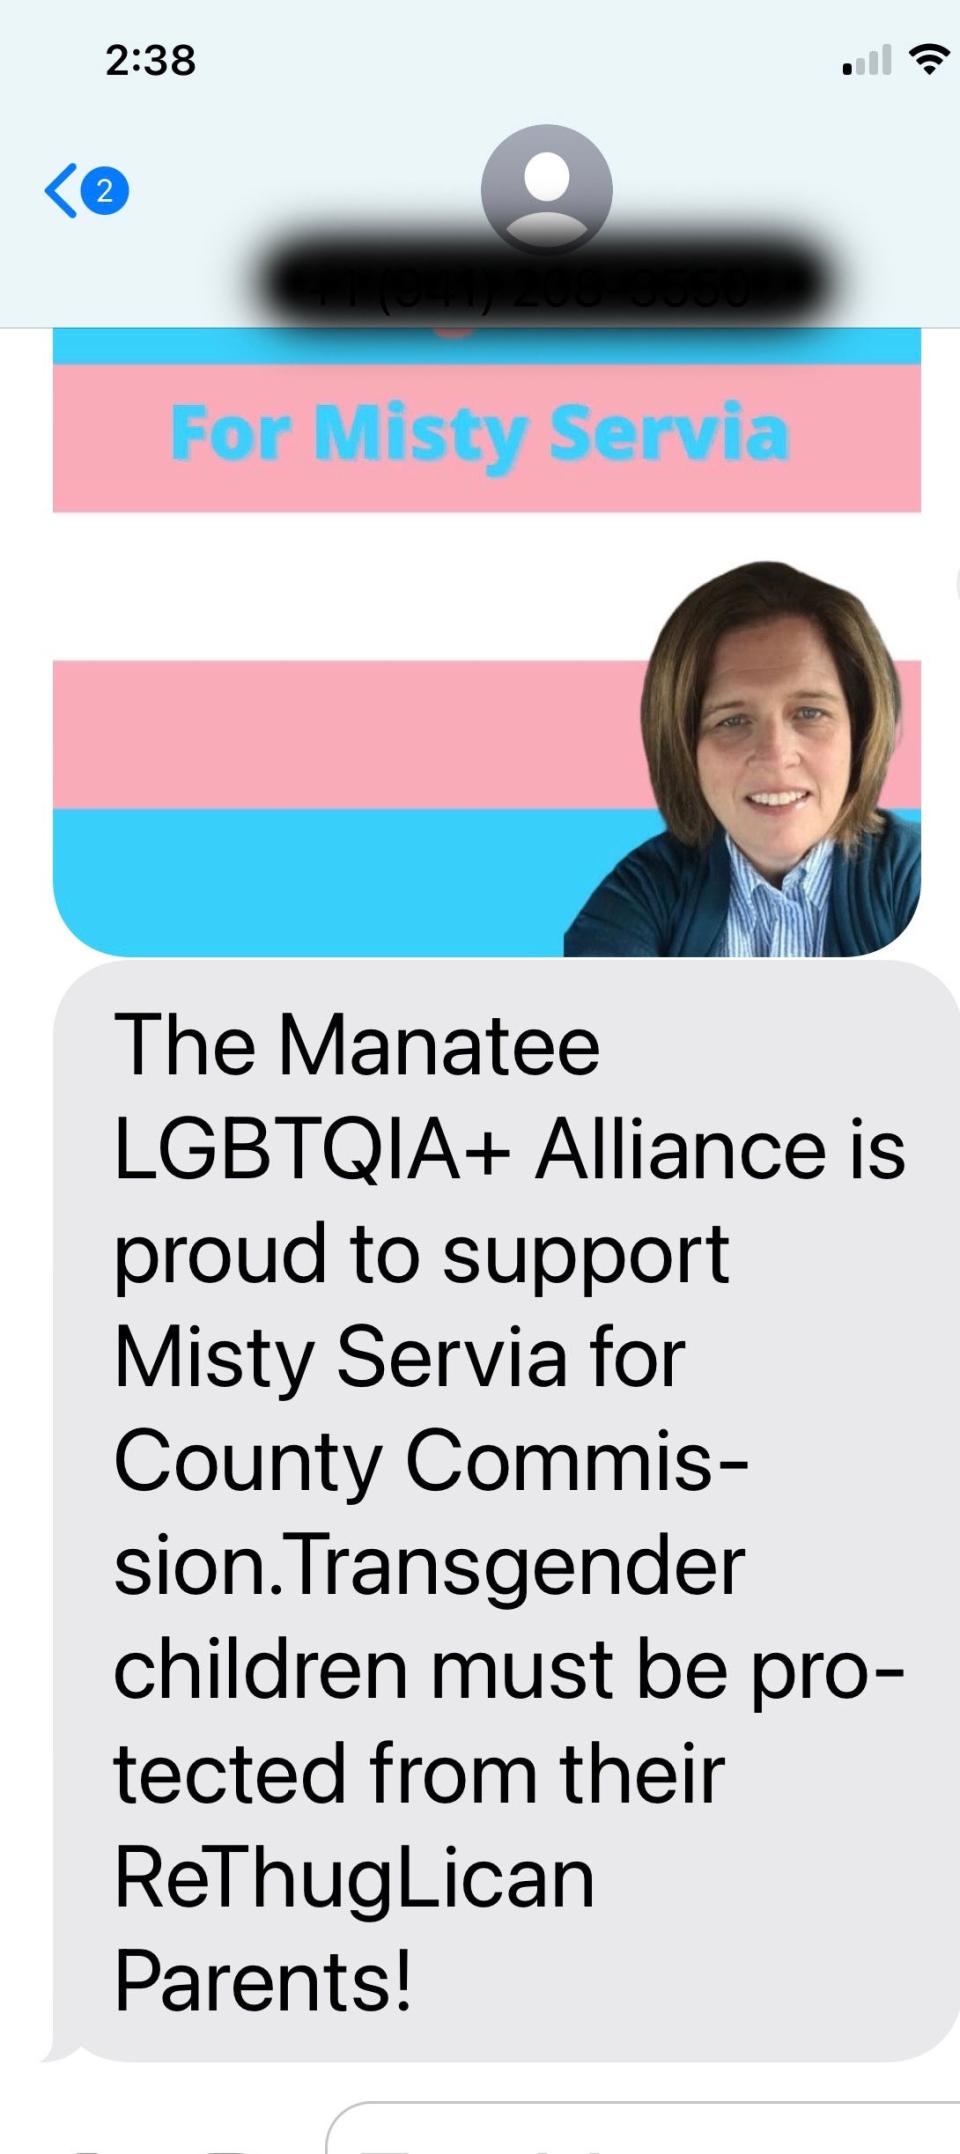 A screenshot of a mass text message that is at the center of recent legal filing by Manatee County Commissioner Misty Servia claiming a hate crime during the heat of the August primary election season.